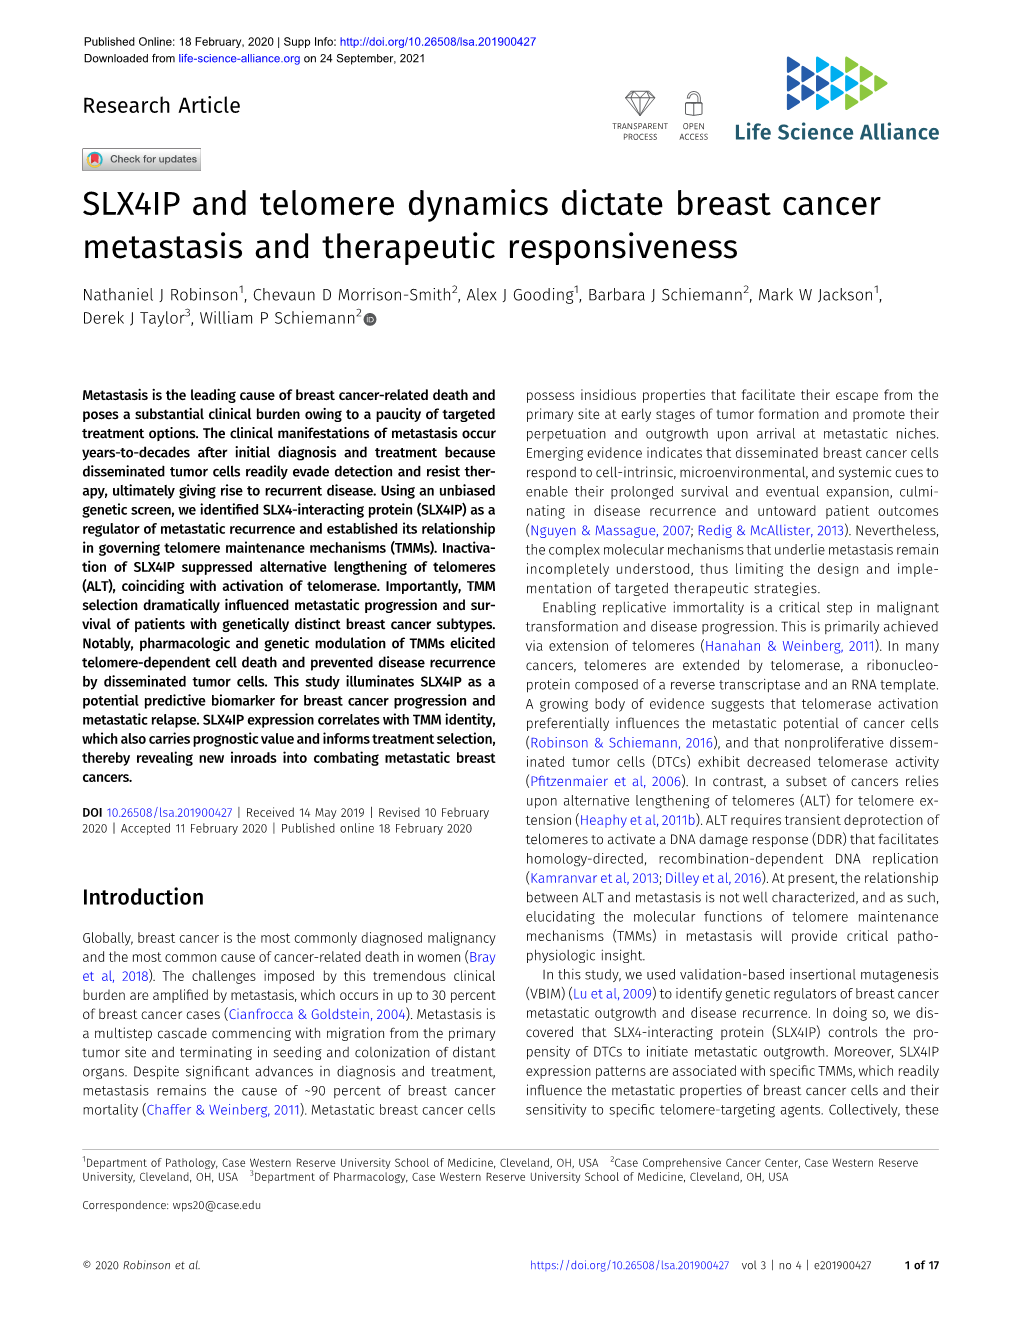 SLX4IP and Telomere Dynamics Dictate Breast Cancer Metastasis and Therapeutic Responsiveness